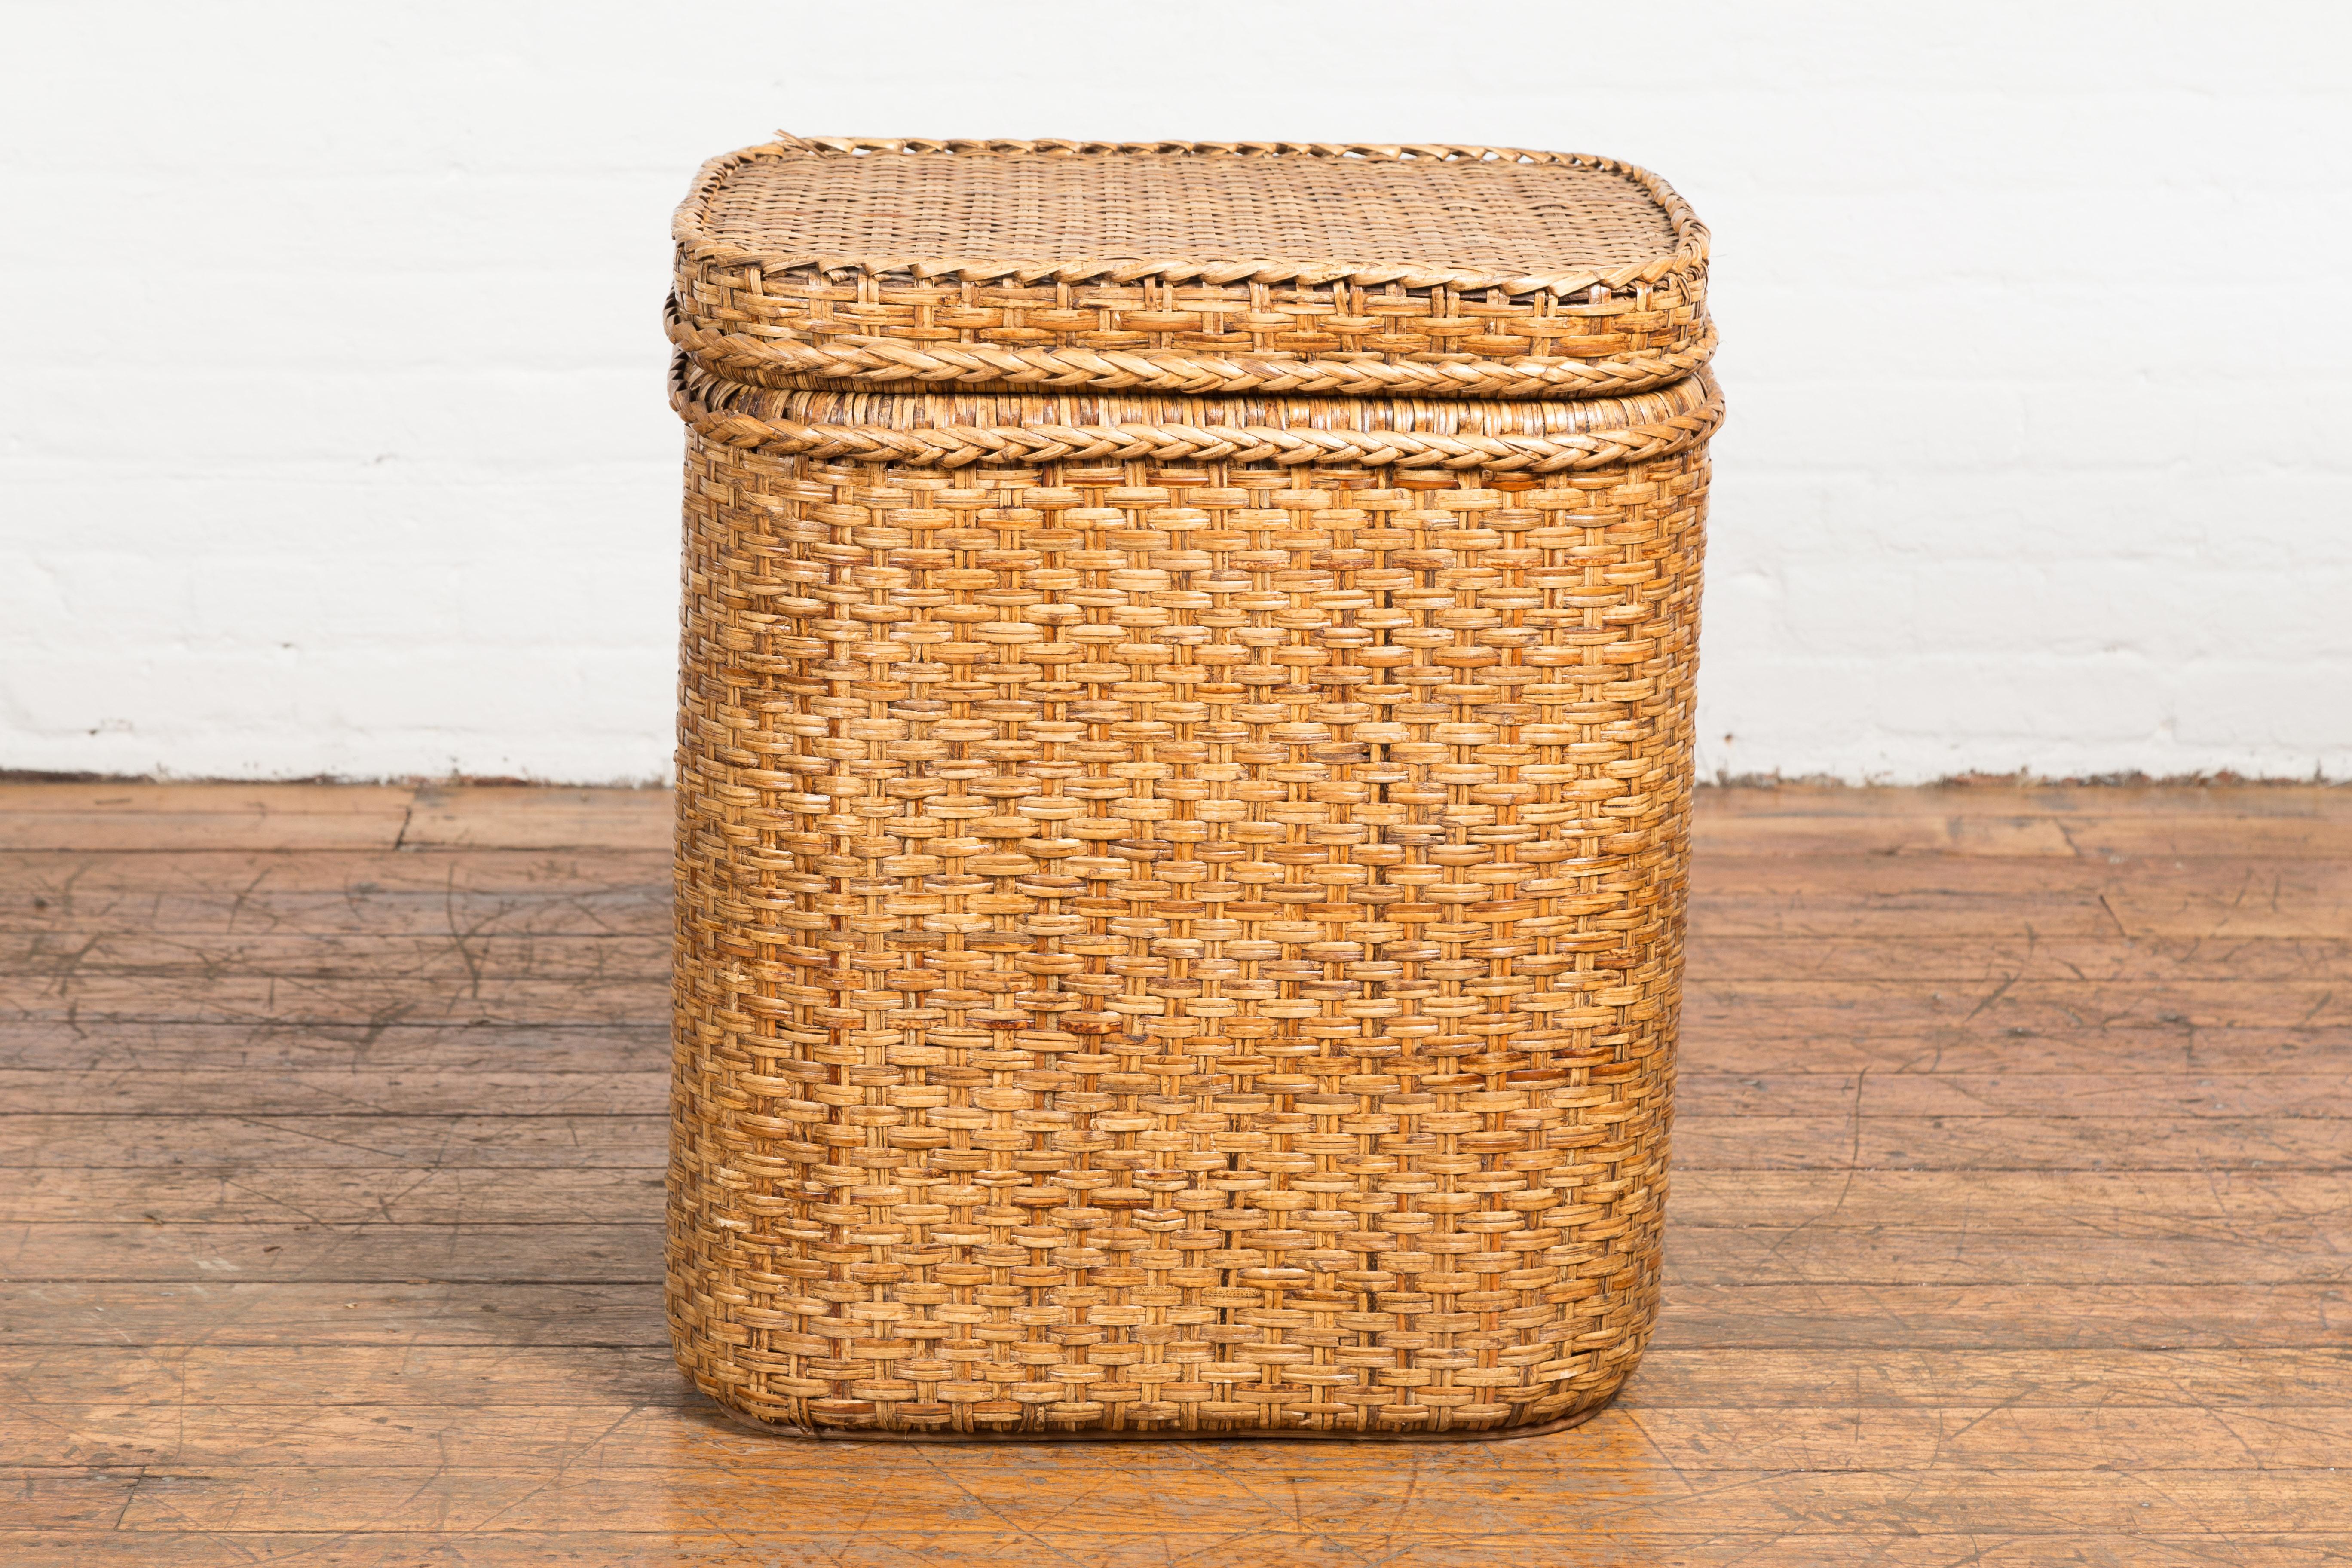 A vintage Burmese woven rattan and wood lidded basket from the mid 20th century lidded with strap, perfect to be used as a hamper, storage or toy box. This charming vintage Burmese woven rattan and wood lidded basket from the mid 20th century is a